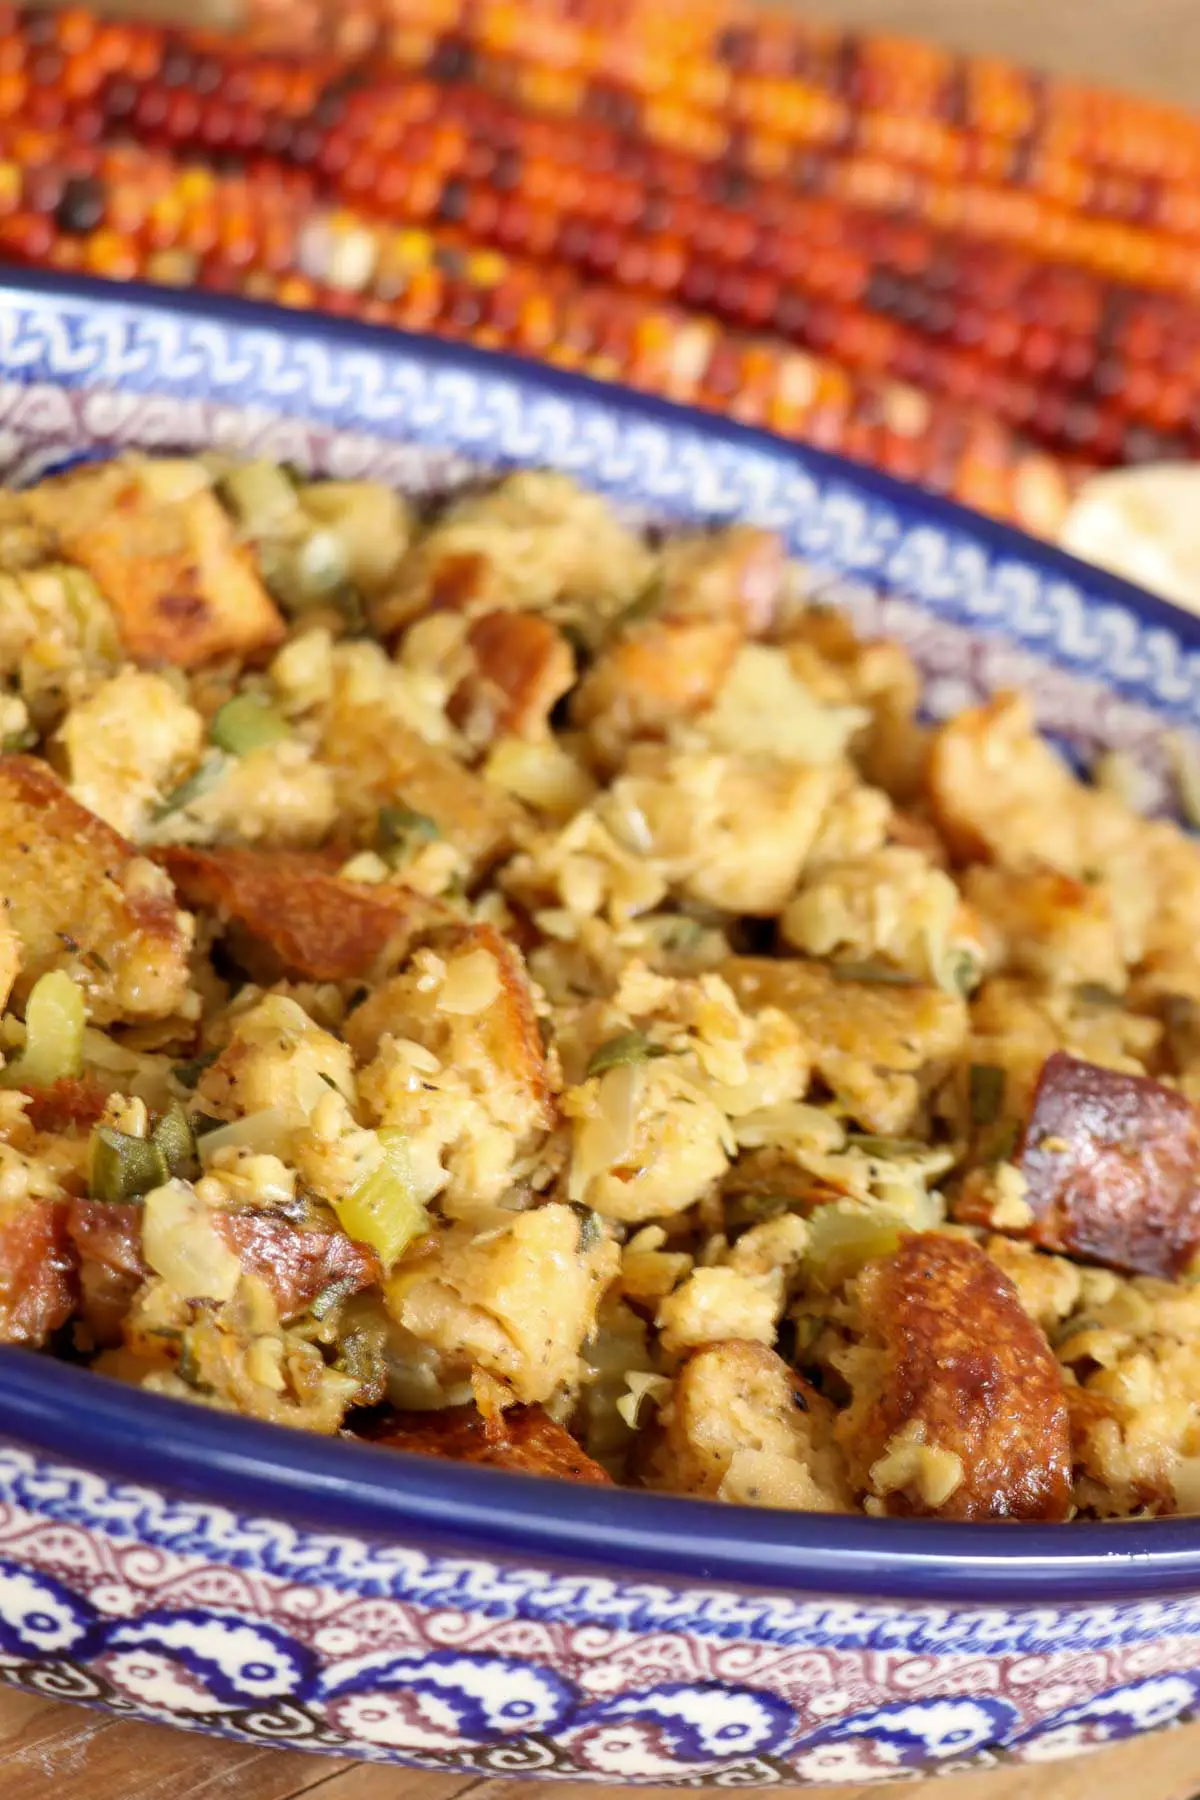 Sage and onion stuffing in a blue Polish pottery dish with colorful corn cobs in the background.